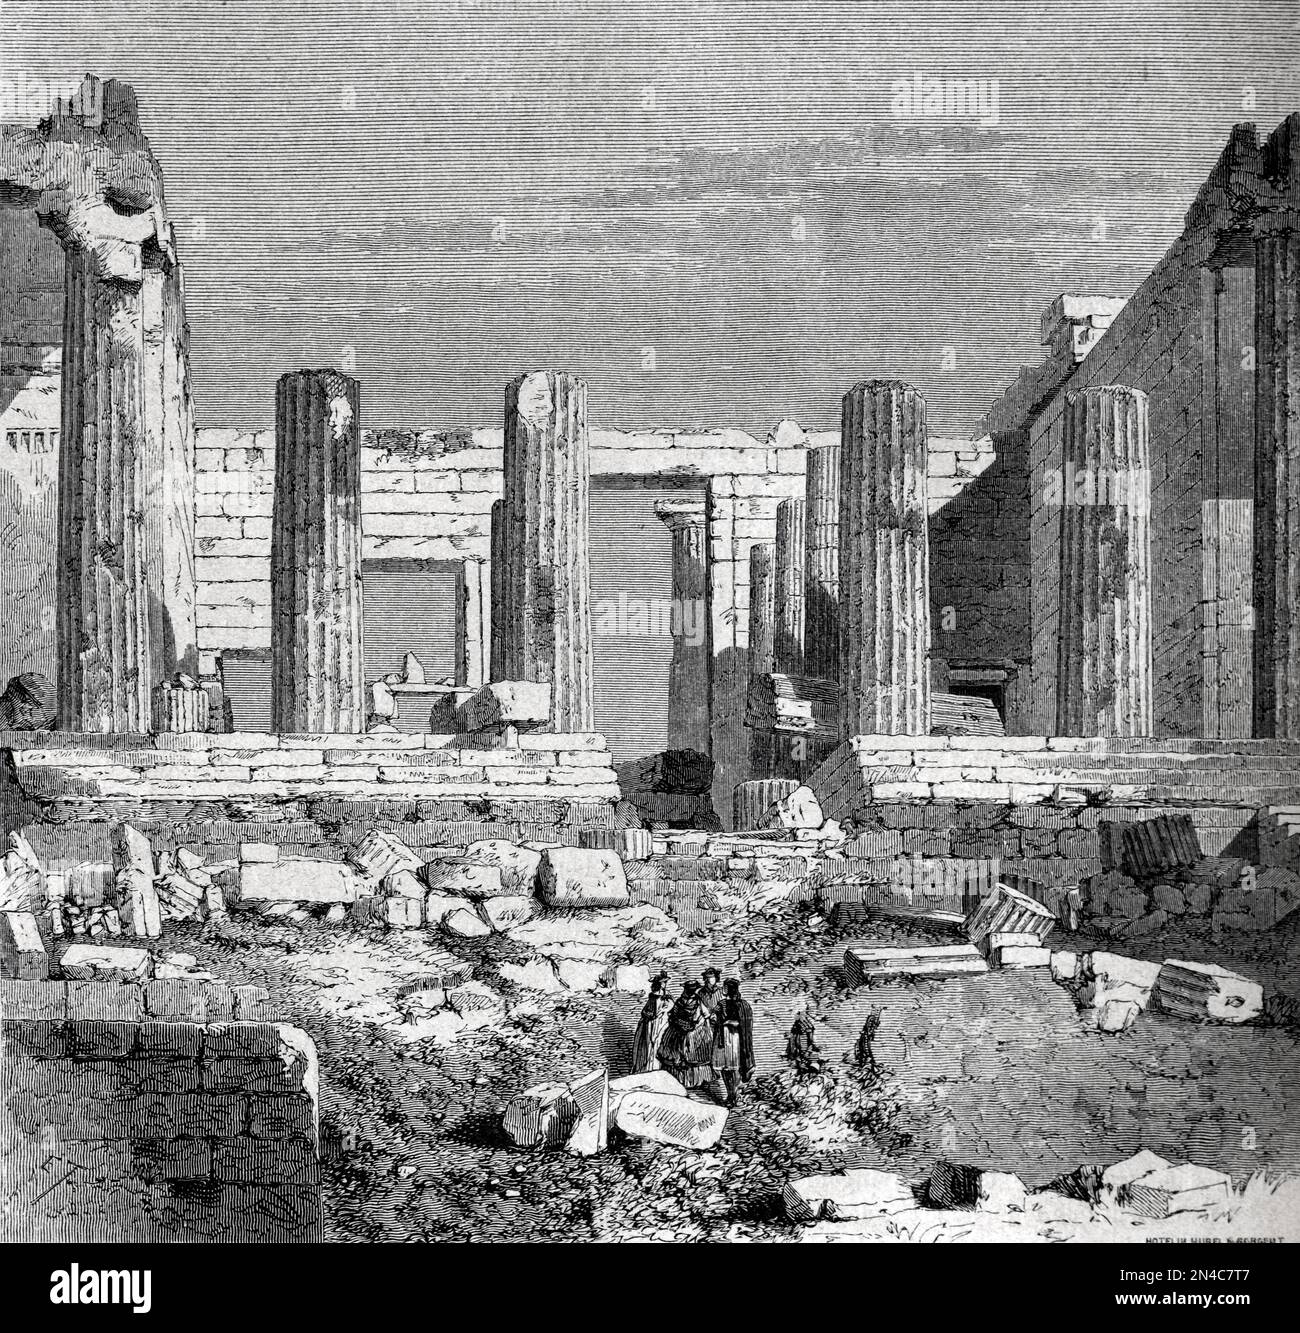 Propylaea (437-432BC) Classical Greek Doric Building and Monumental Ceremonial Gateway to the Acropolis Athens Greece. Vintage Engraving or Illustration 1862 Stock Photo